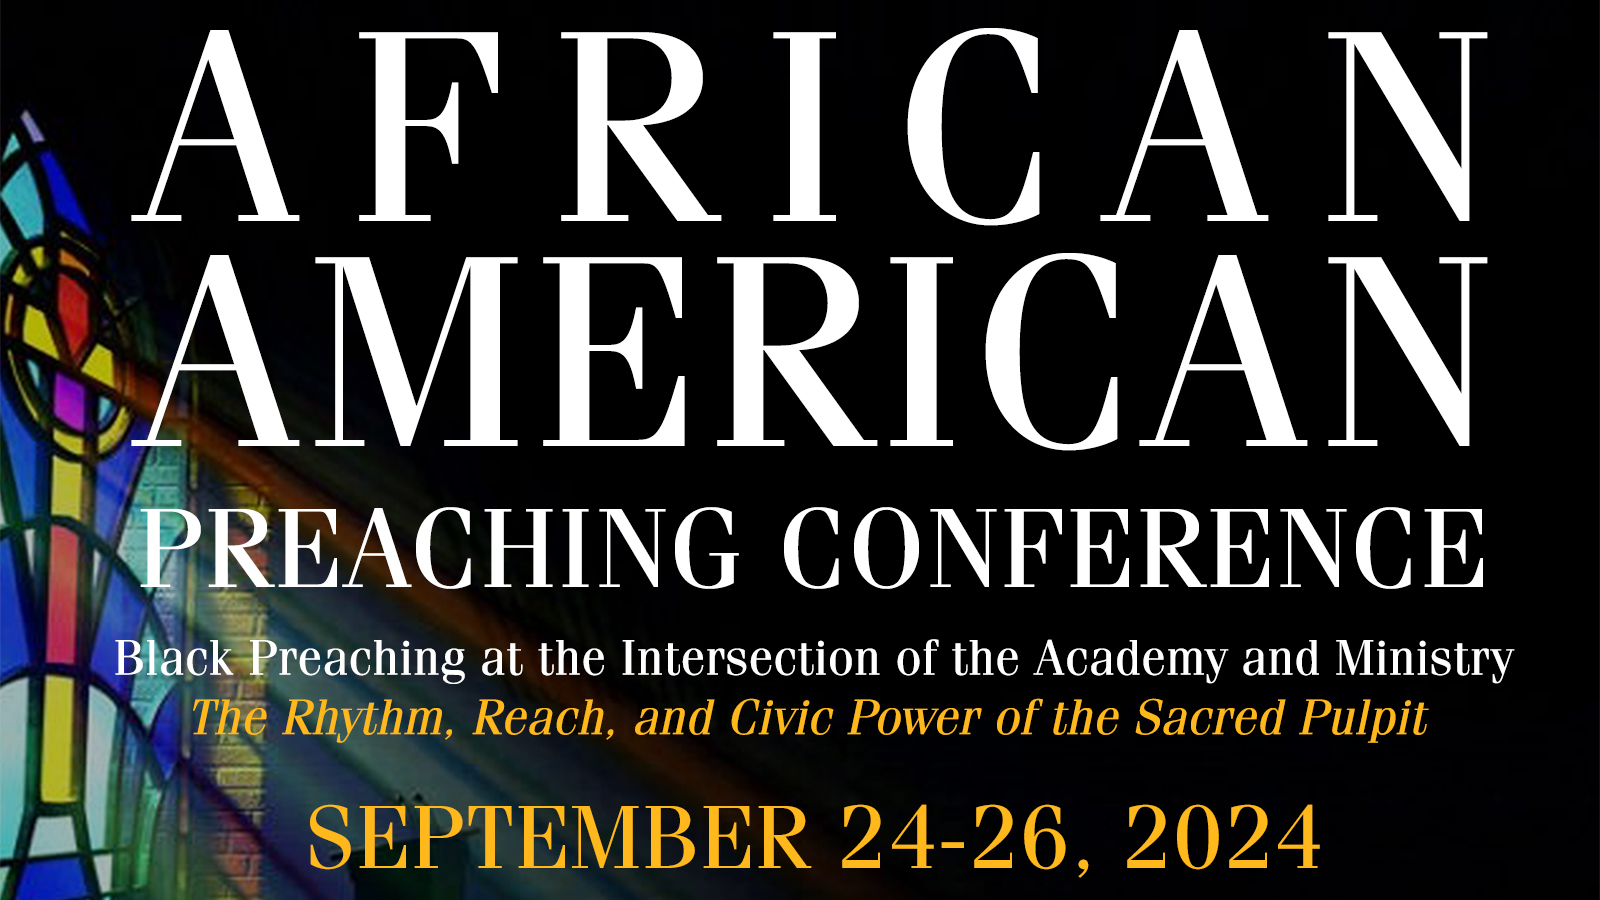 African American Preaching Conference - Graphics with Event Details